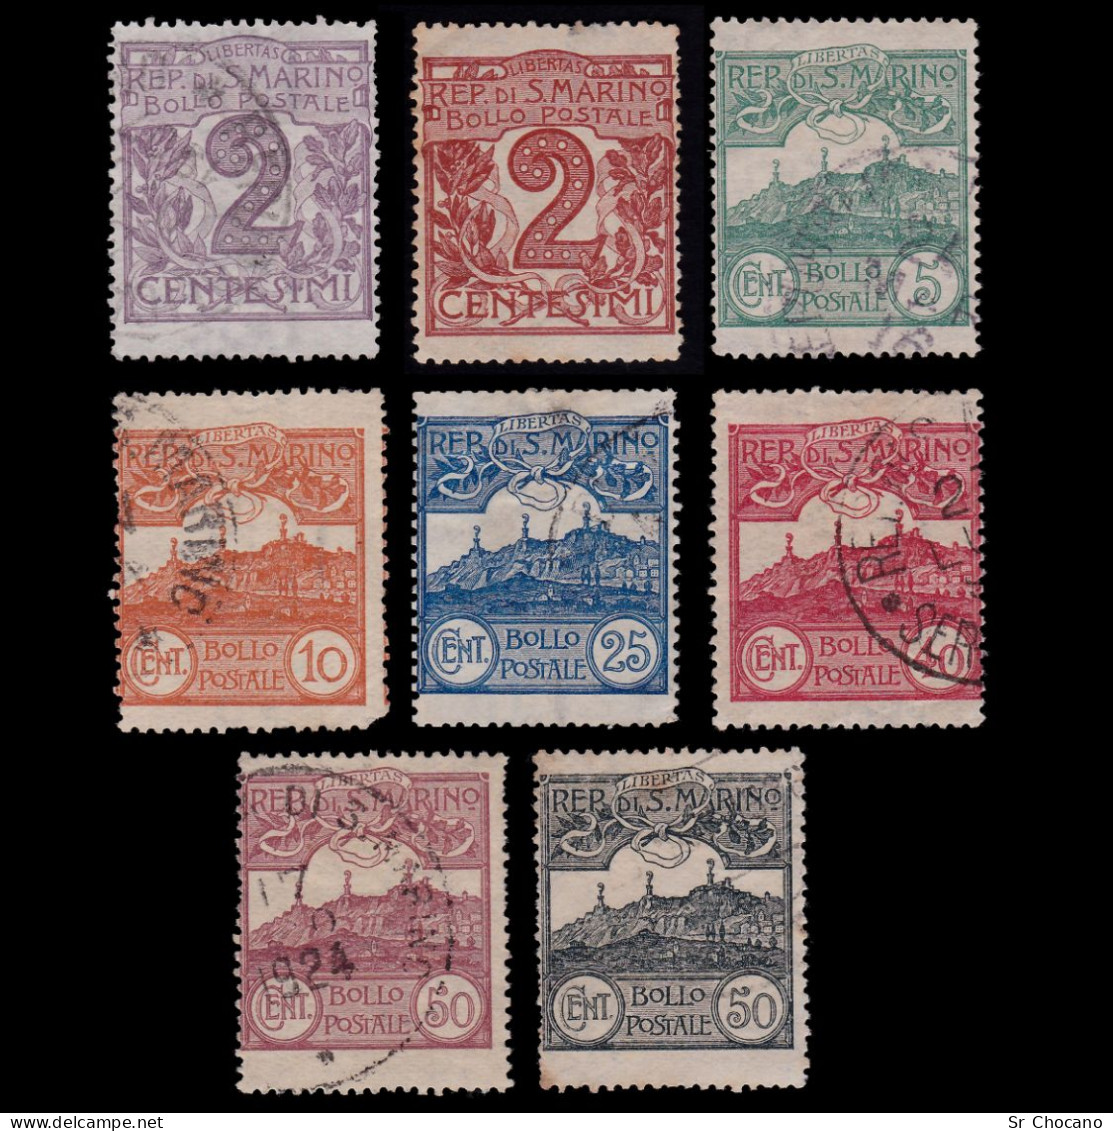 SAN MARINO STAMPS.1903/25.SET 8 .USED. - Used Stamps